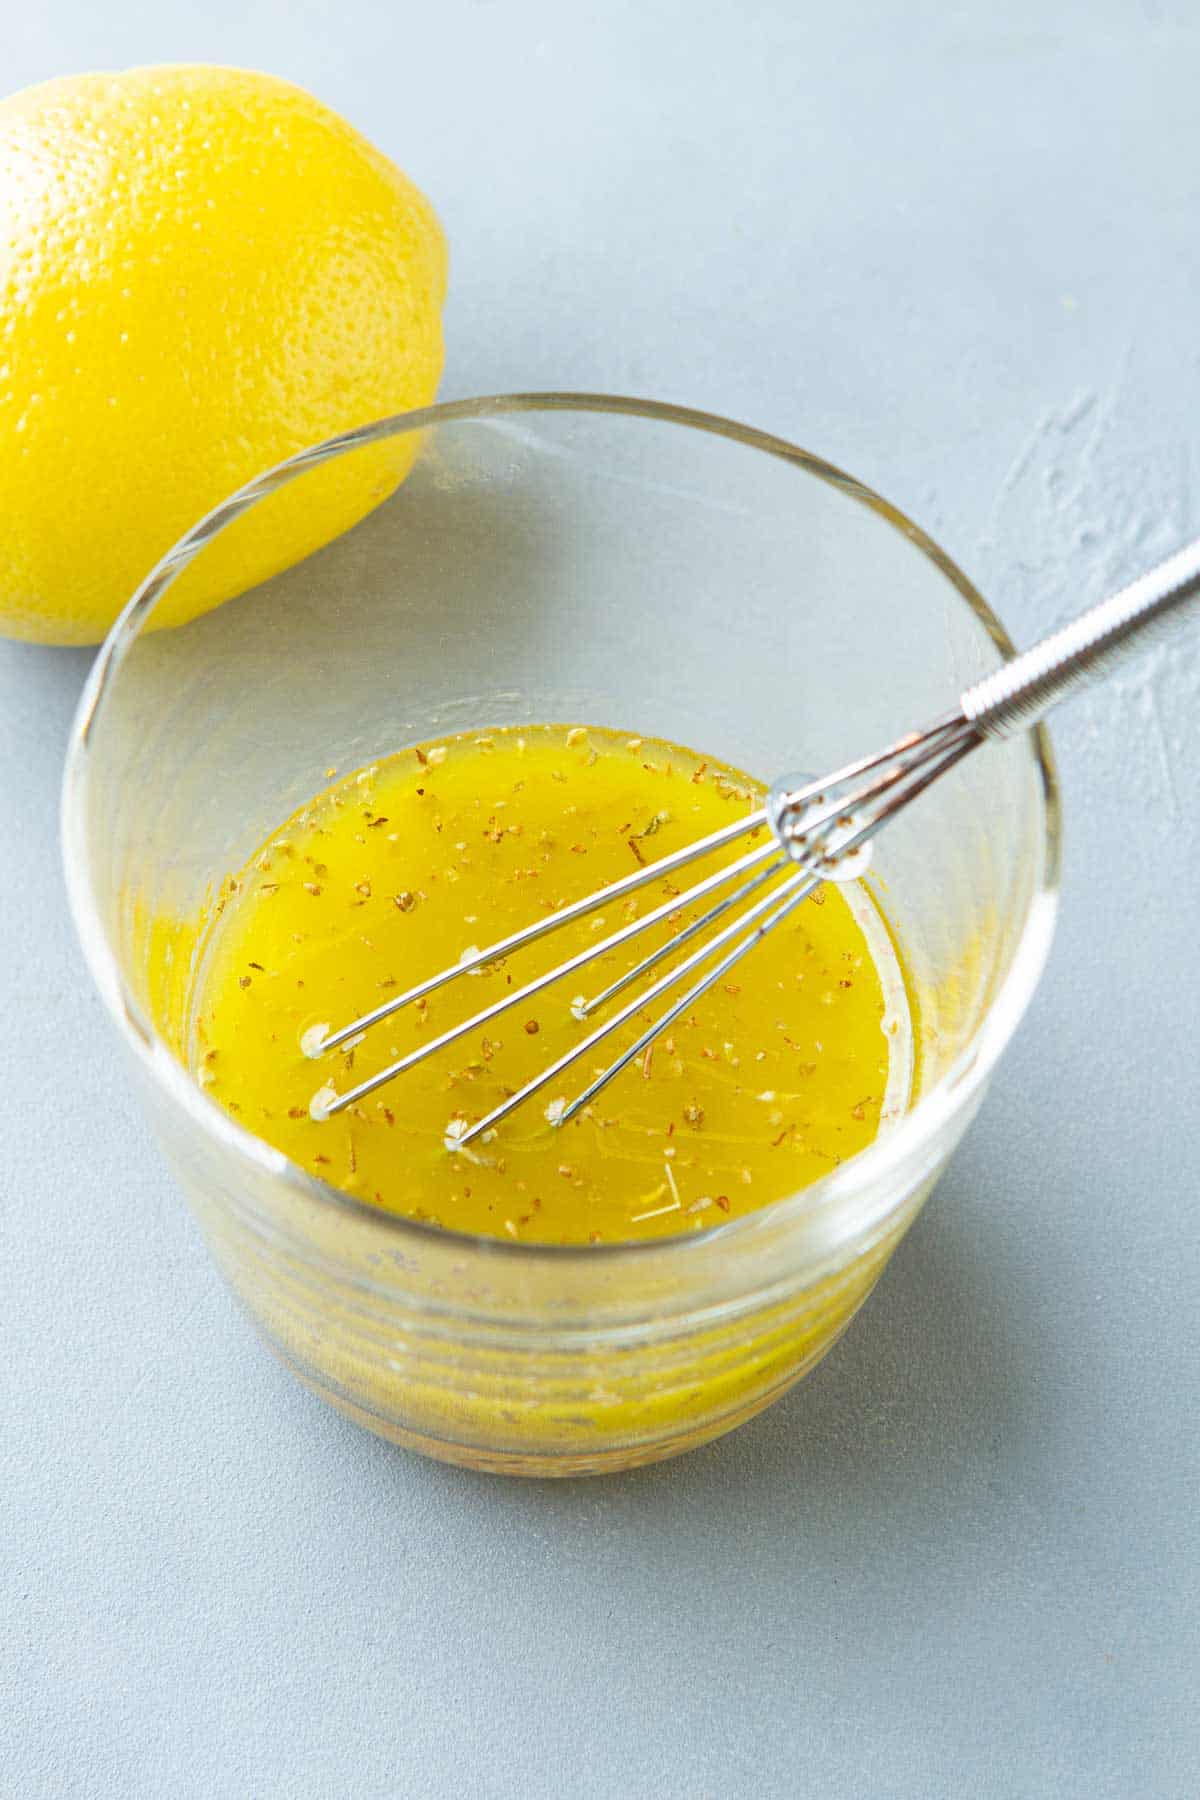 Lemon vinaigrette and a small whisk in a glass.